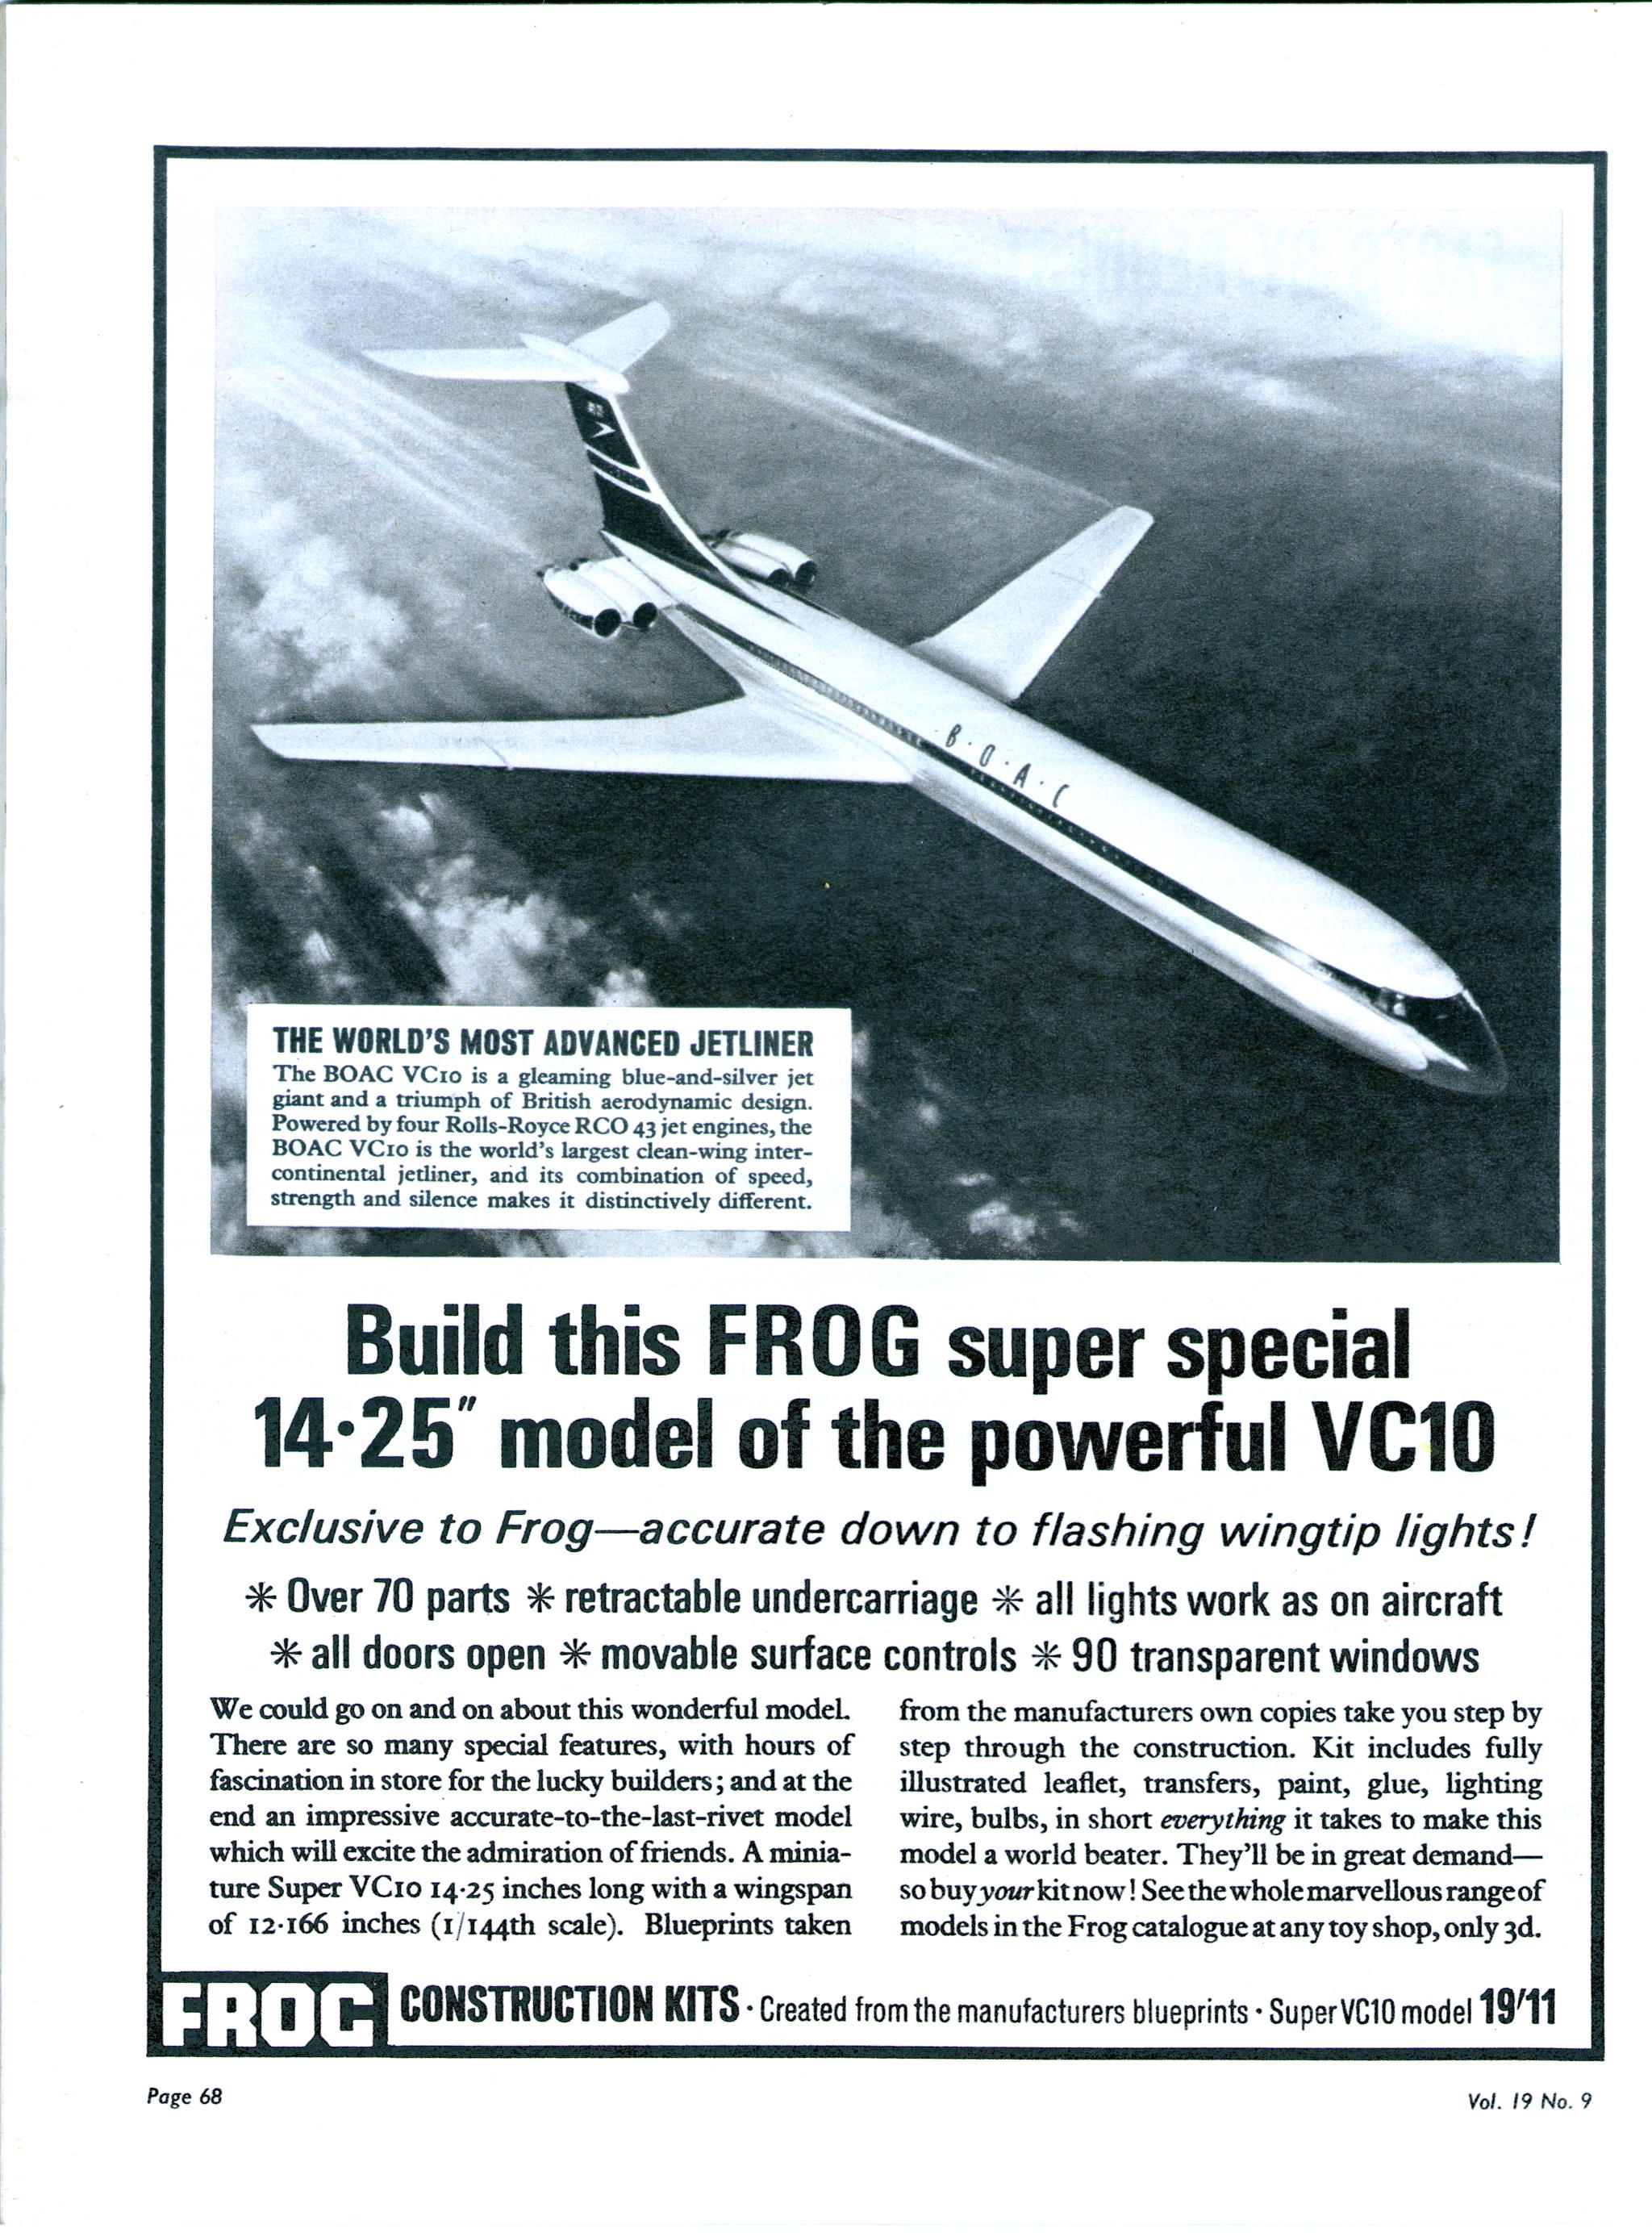 FROG F140 Super VC-10 advertising Flying Review International 1964 may Vol.19 No.9